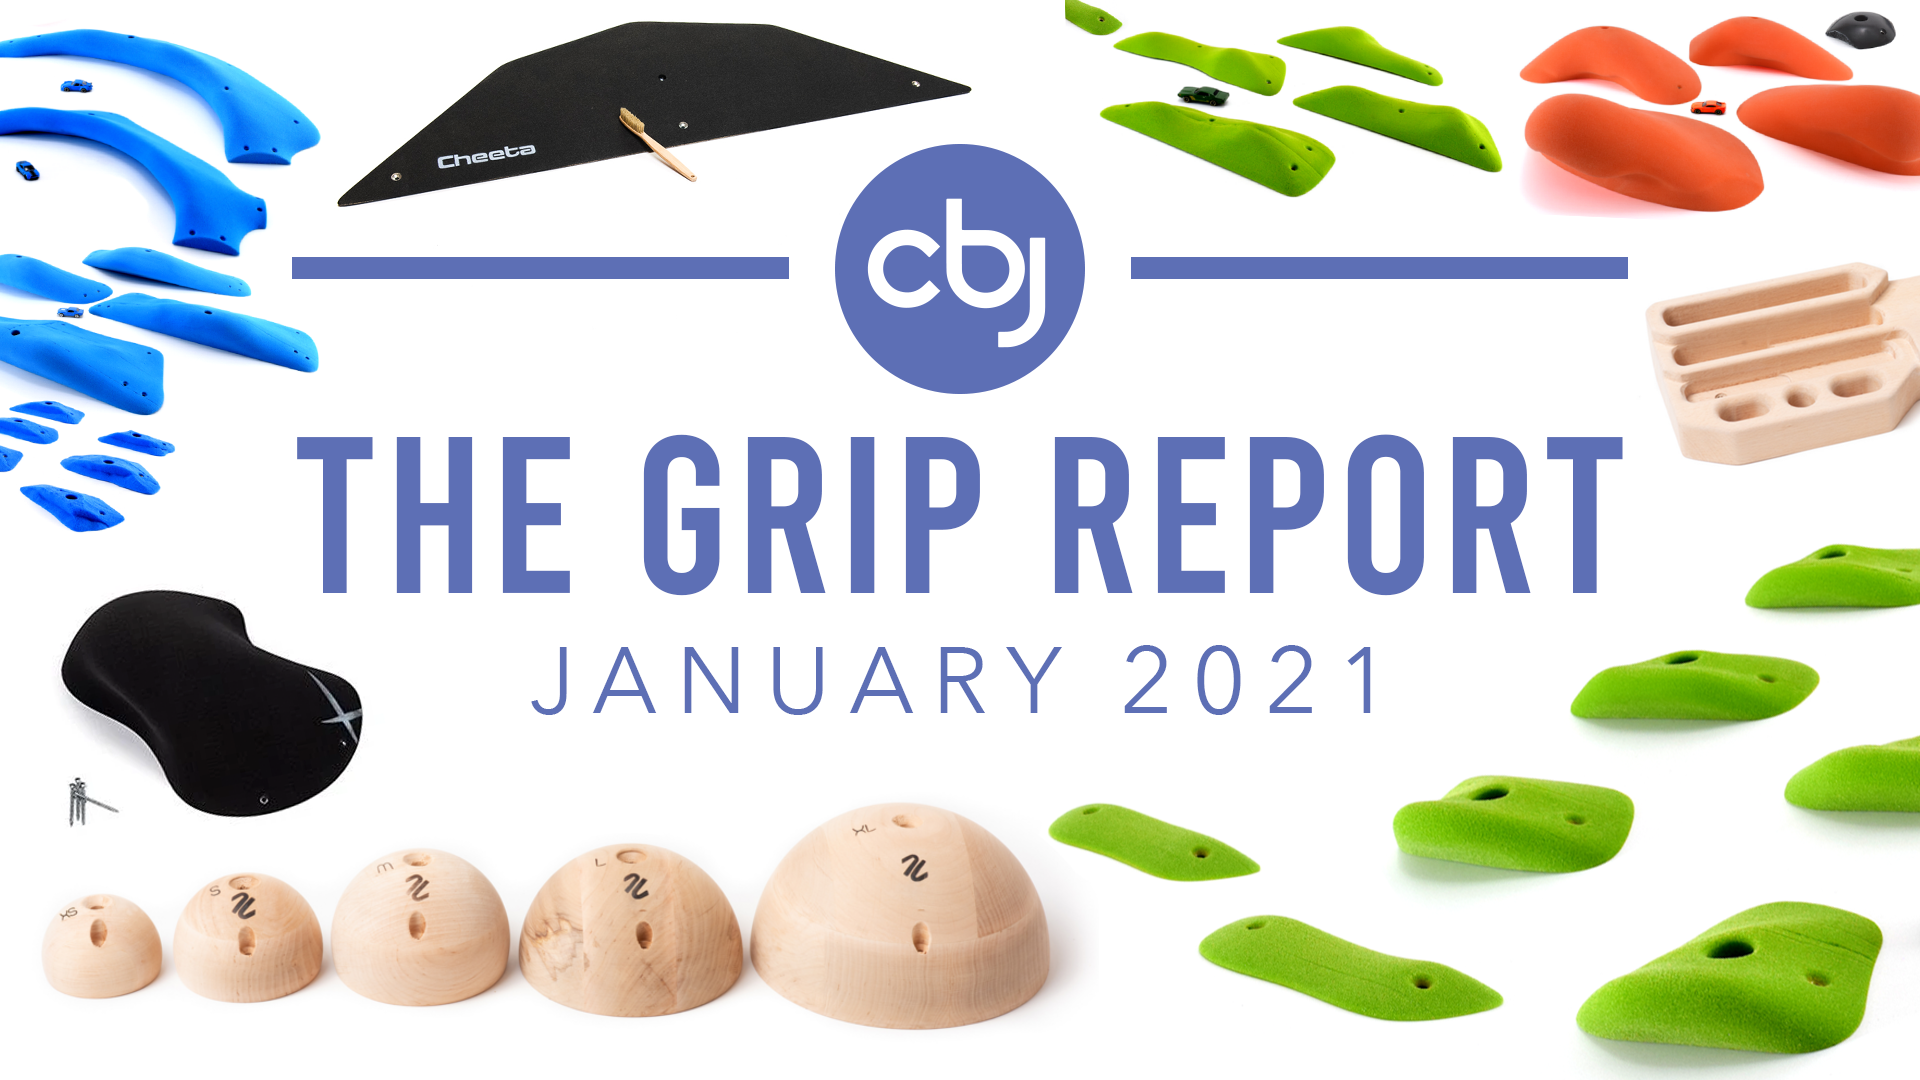 The Grip Report: January 2021